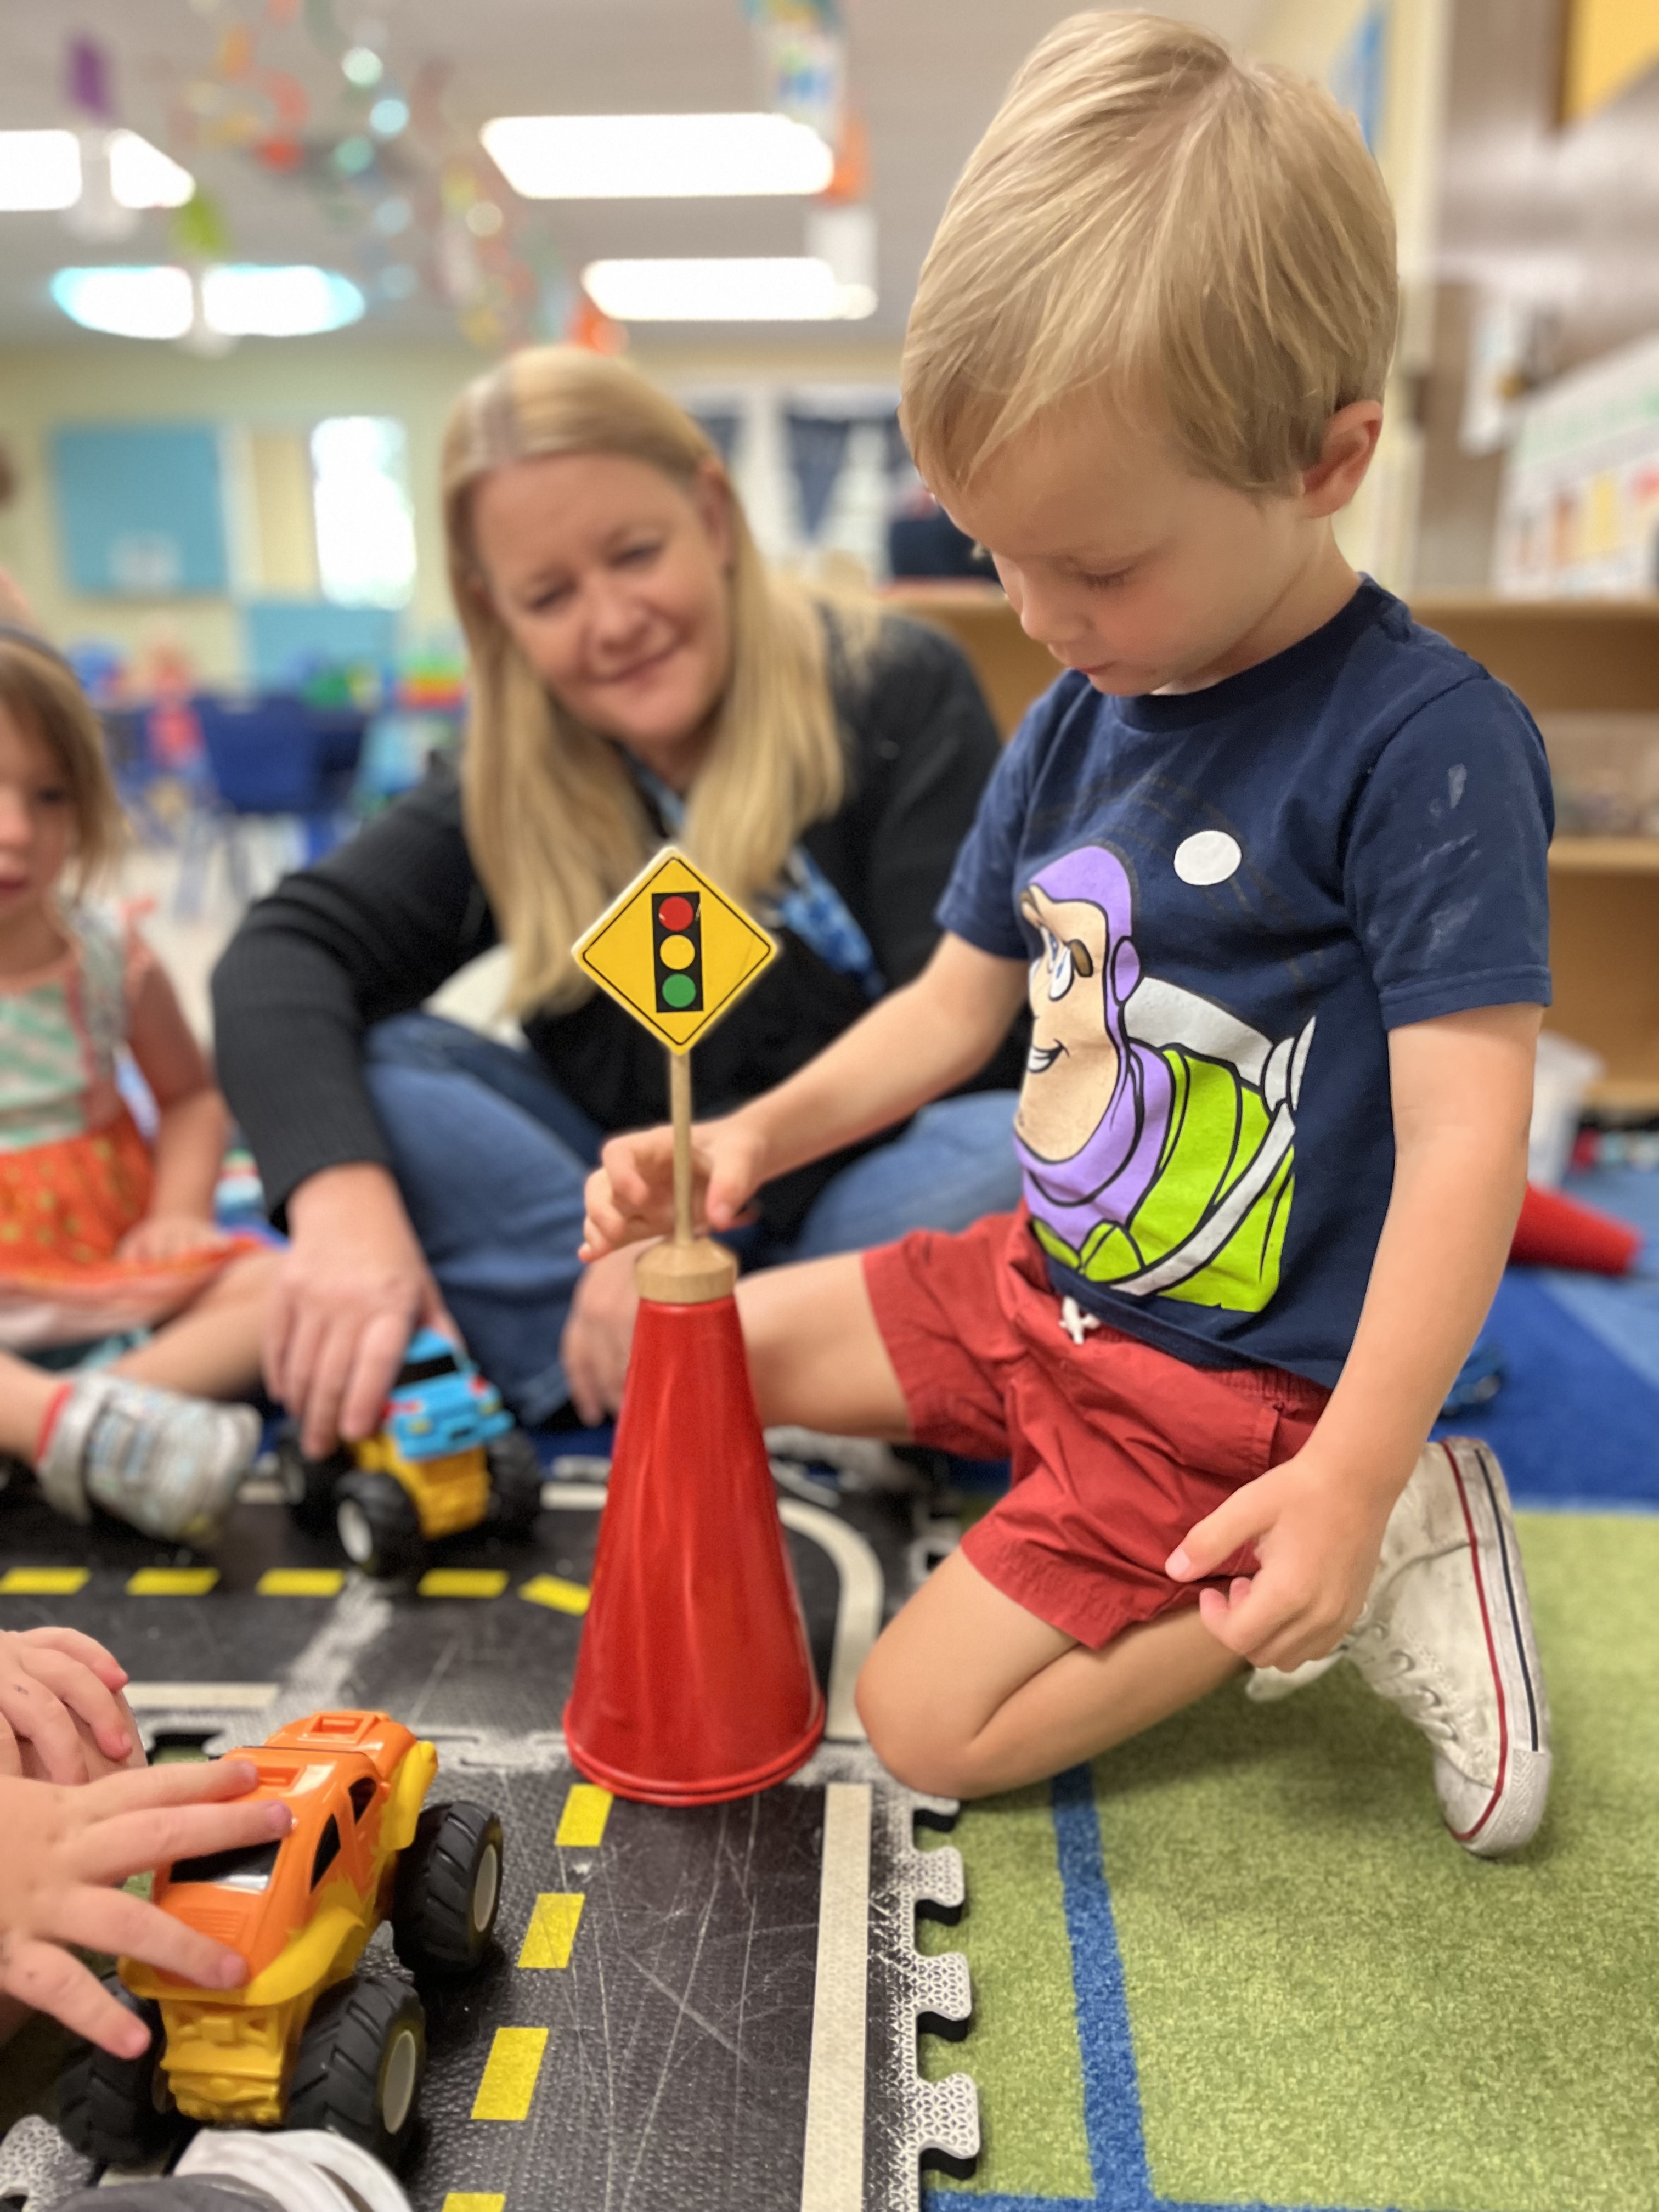 A teacher watches as a young student uses wooden blocks to build a road for toy trucks.